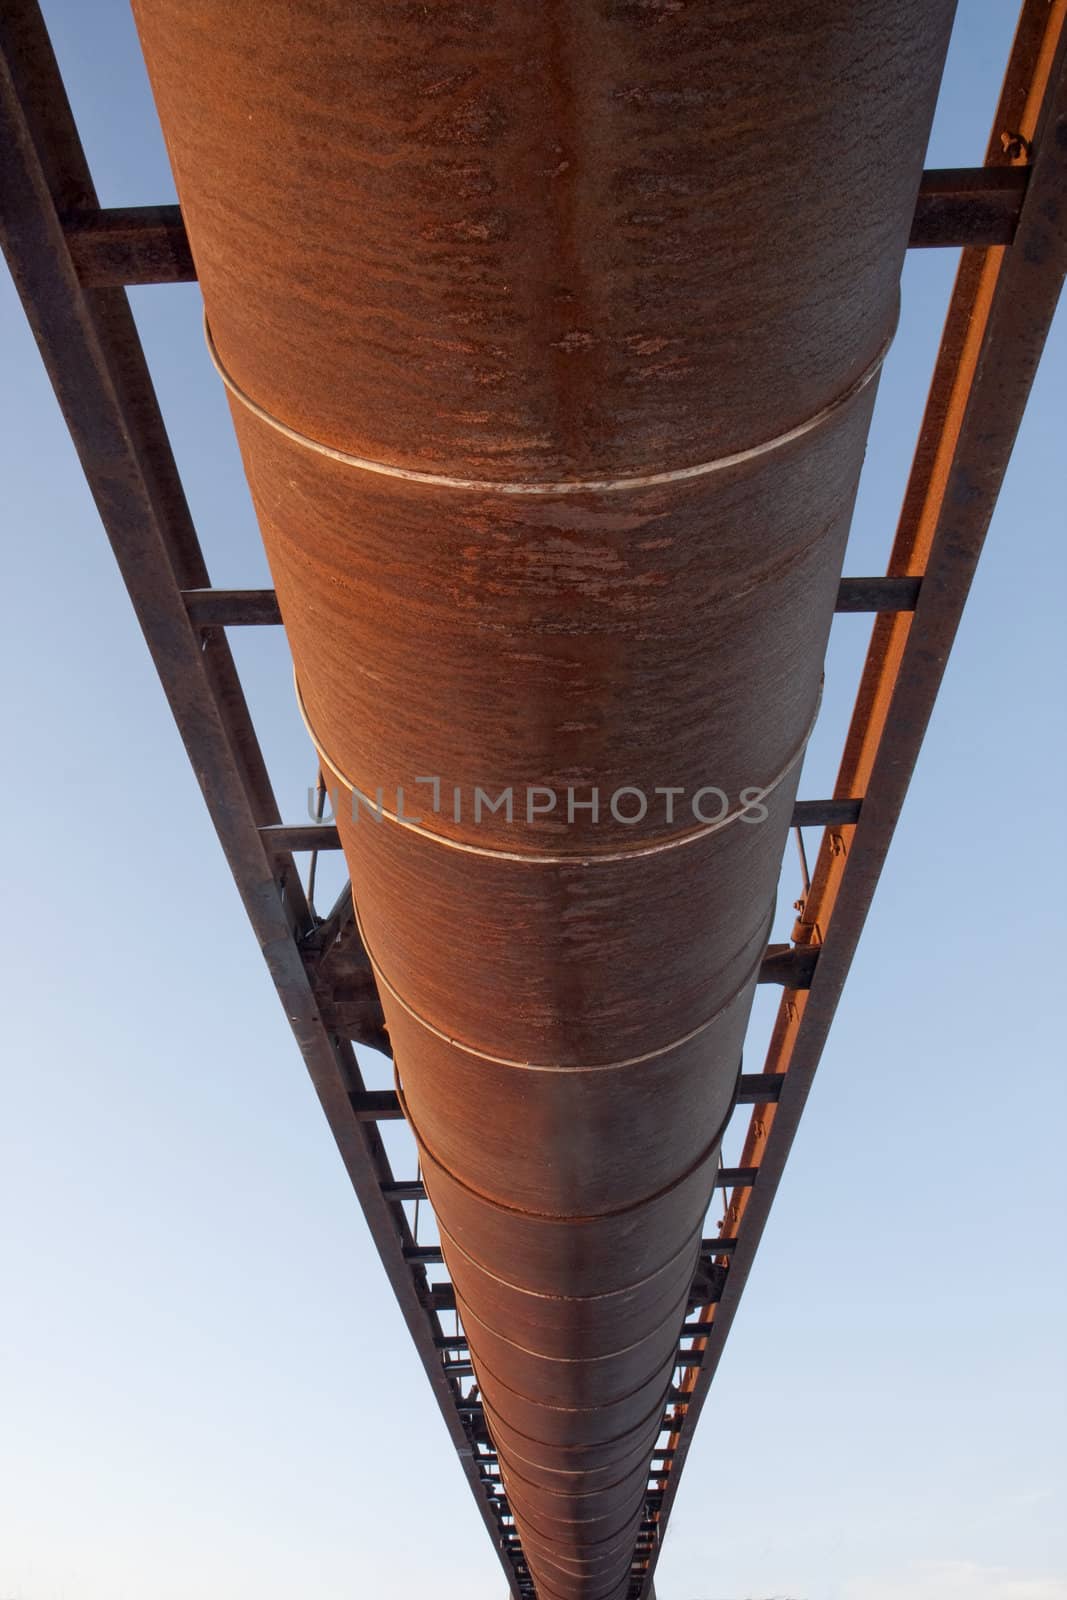 suspended rusty pipe (irrigation ditch aqueduct) shot from below against sky